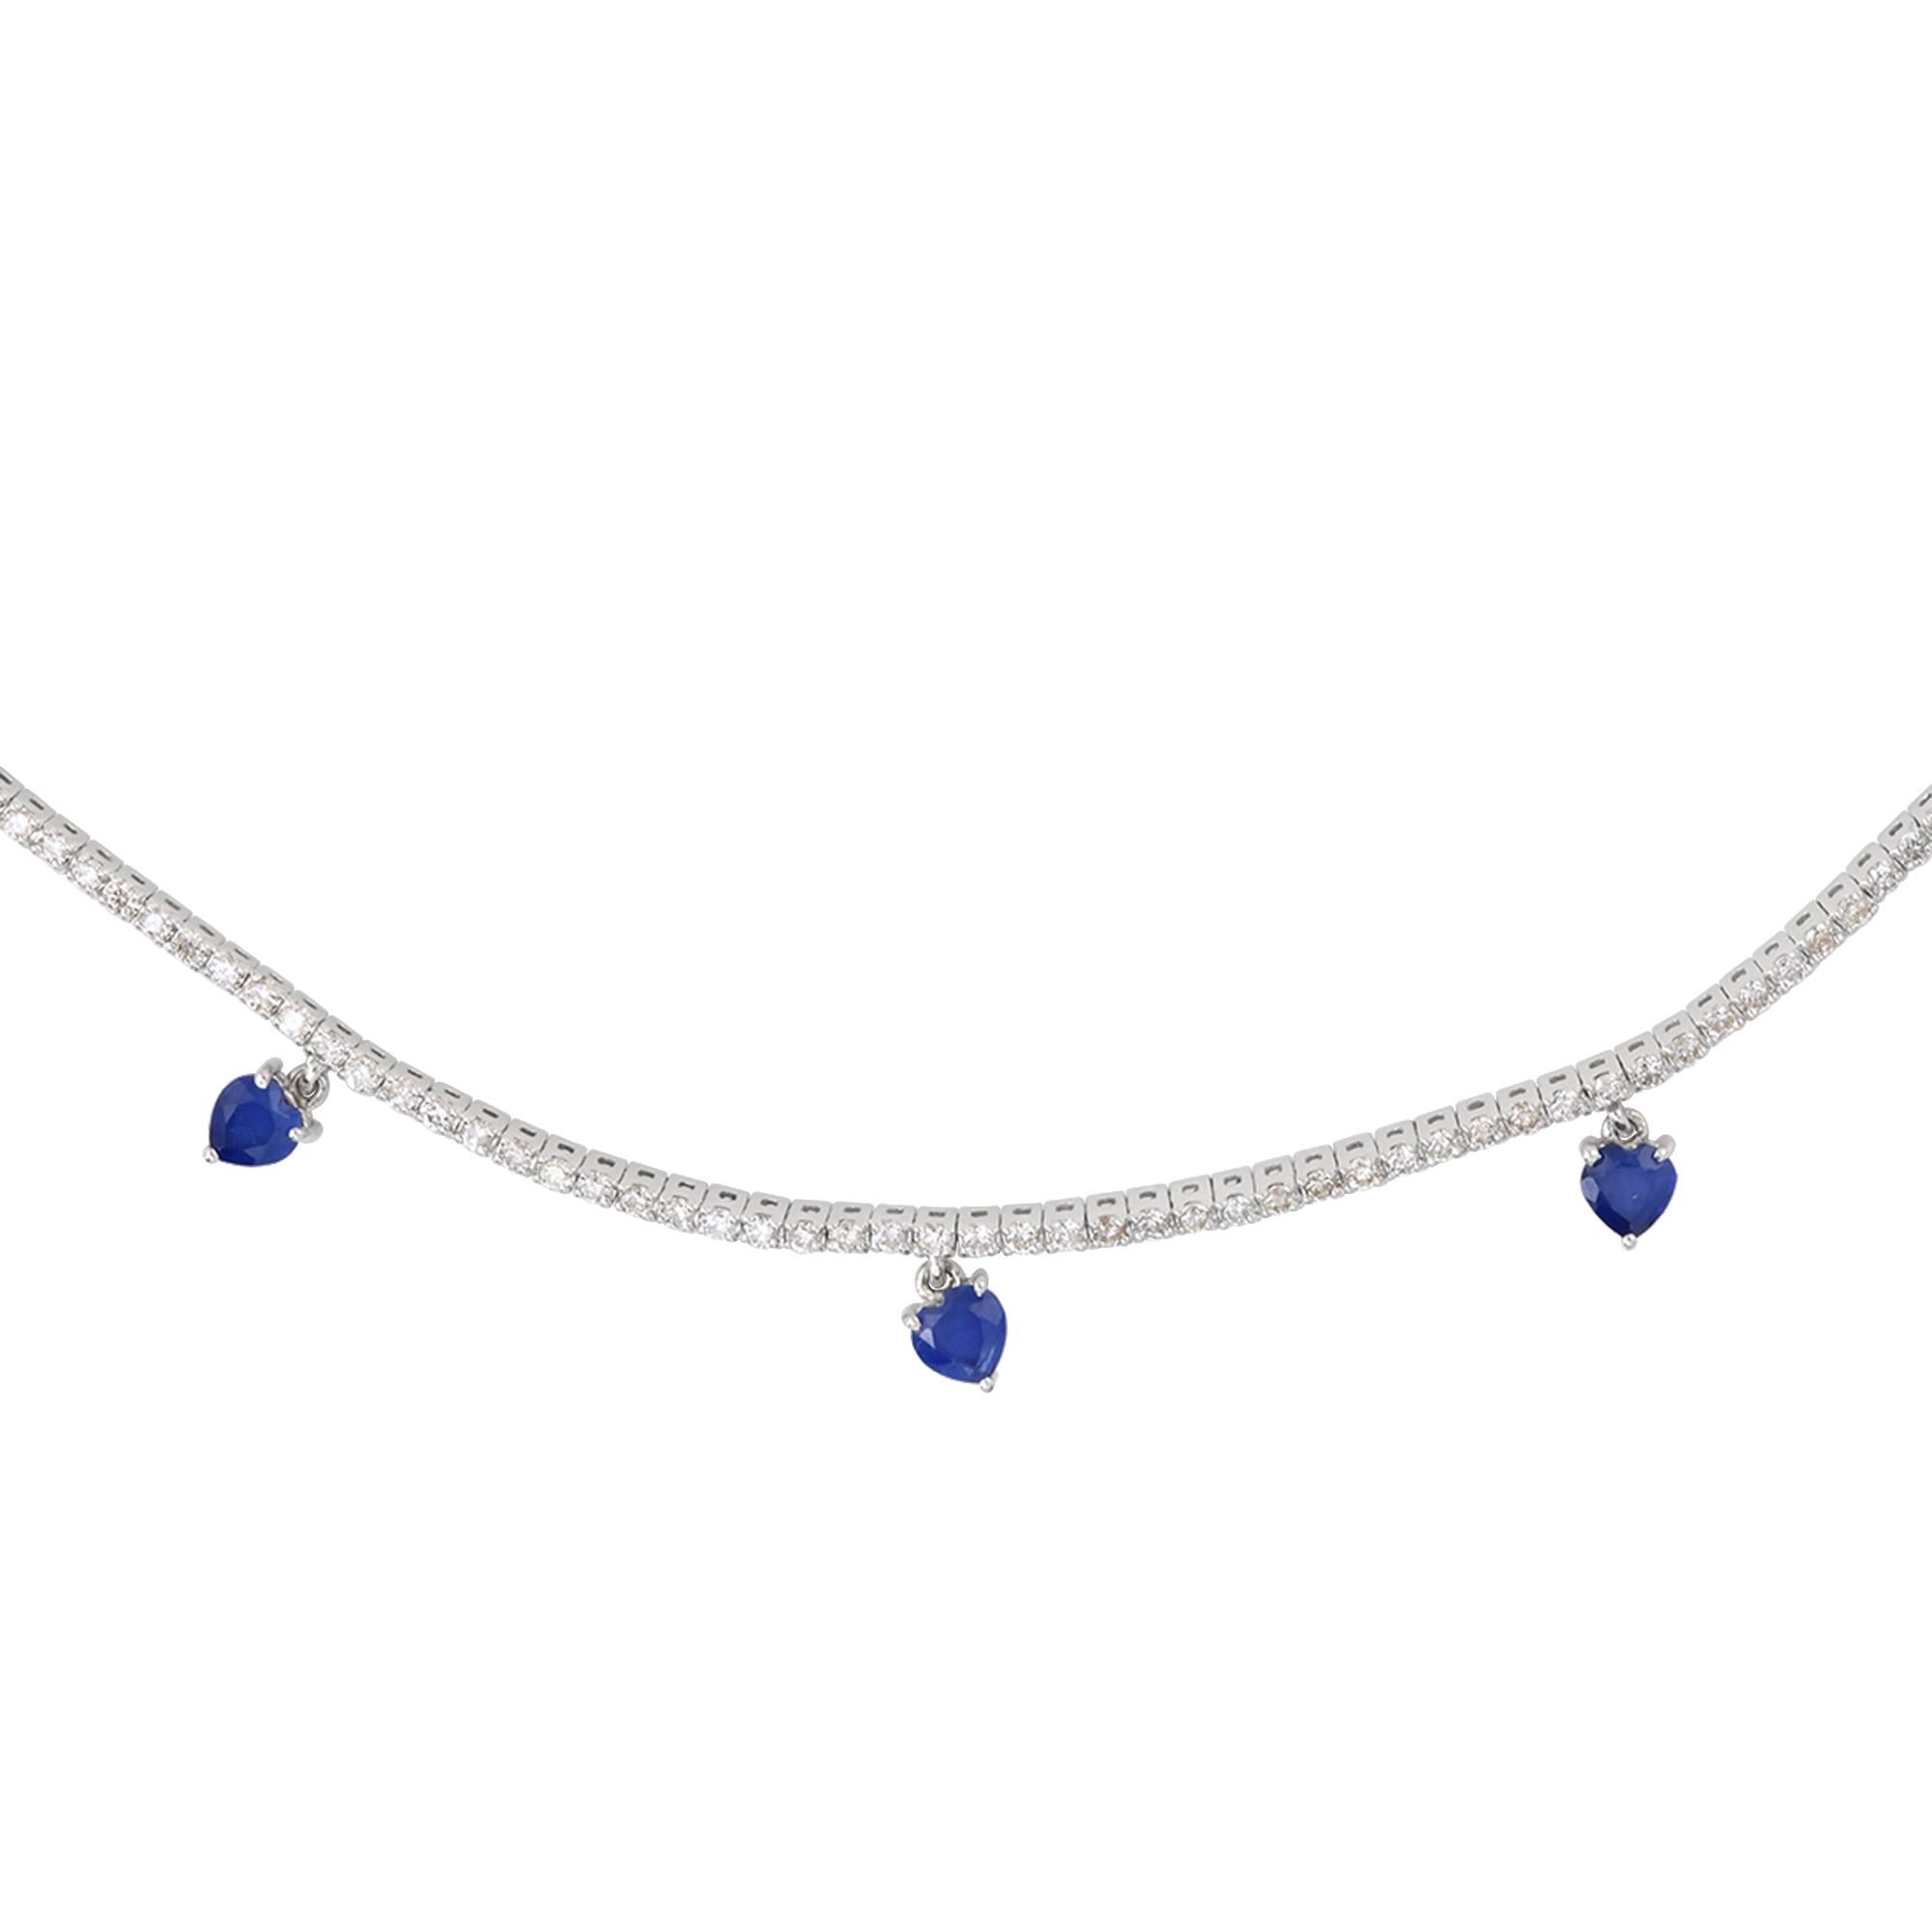 This necklace is a versatile piece that can be worn for both formal occasions and everyday elegance. Whether it's a romantic evening out, a special celebration, or simply a desire to add a touch of glamour to your daily attire, this necklace